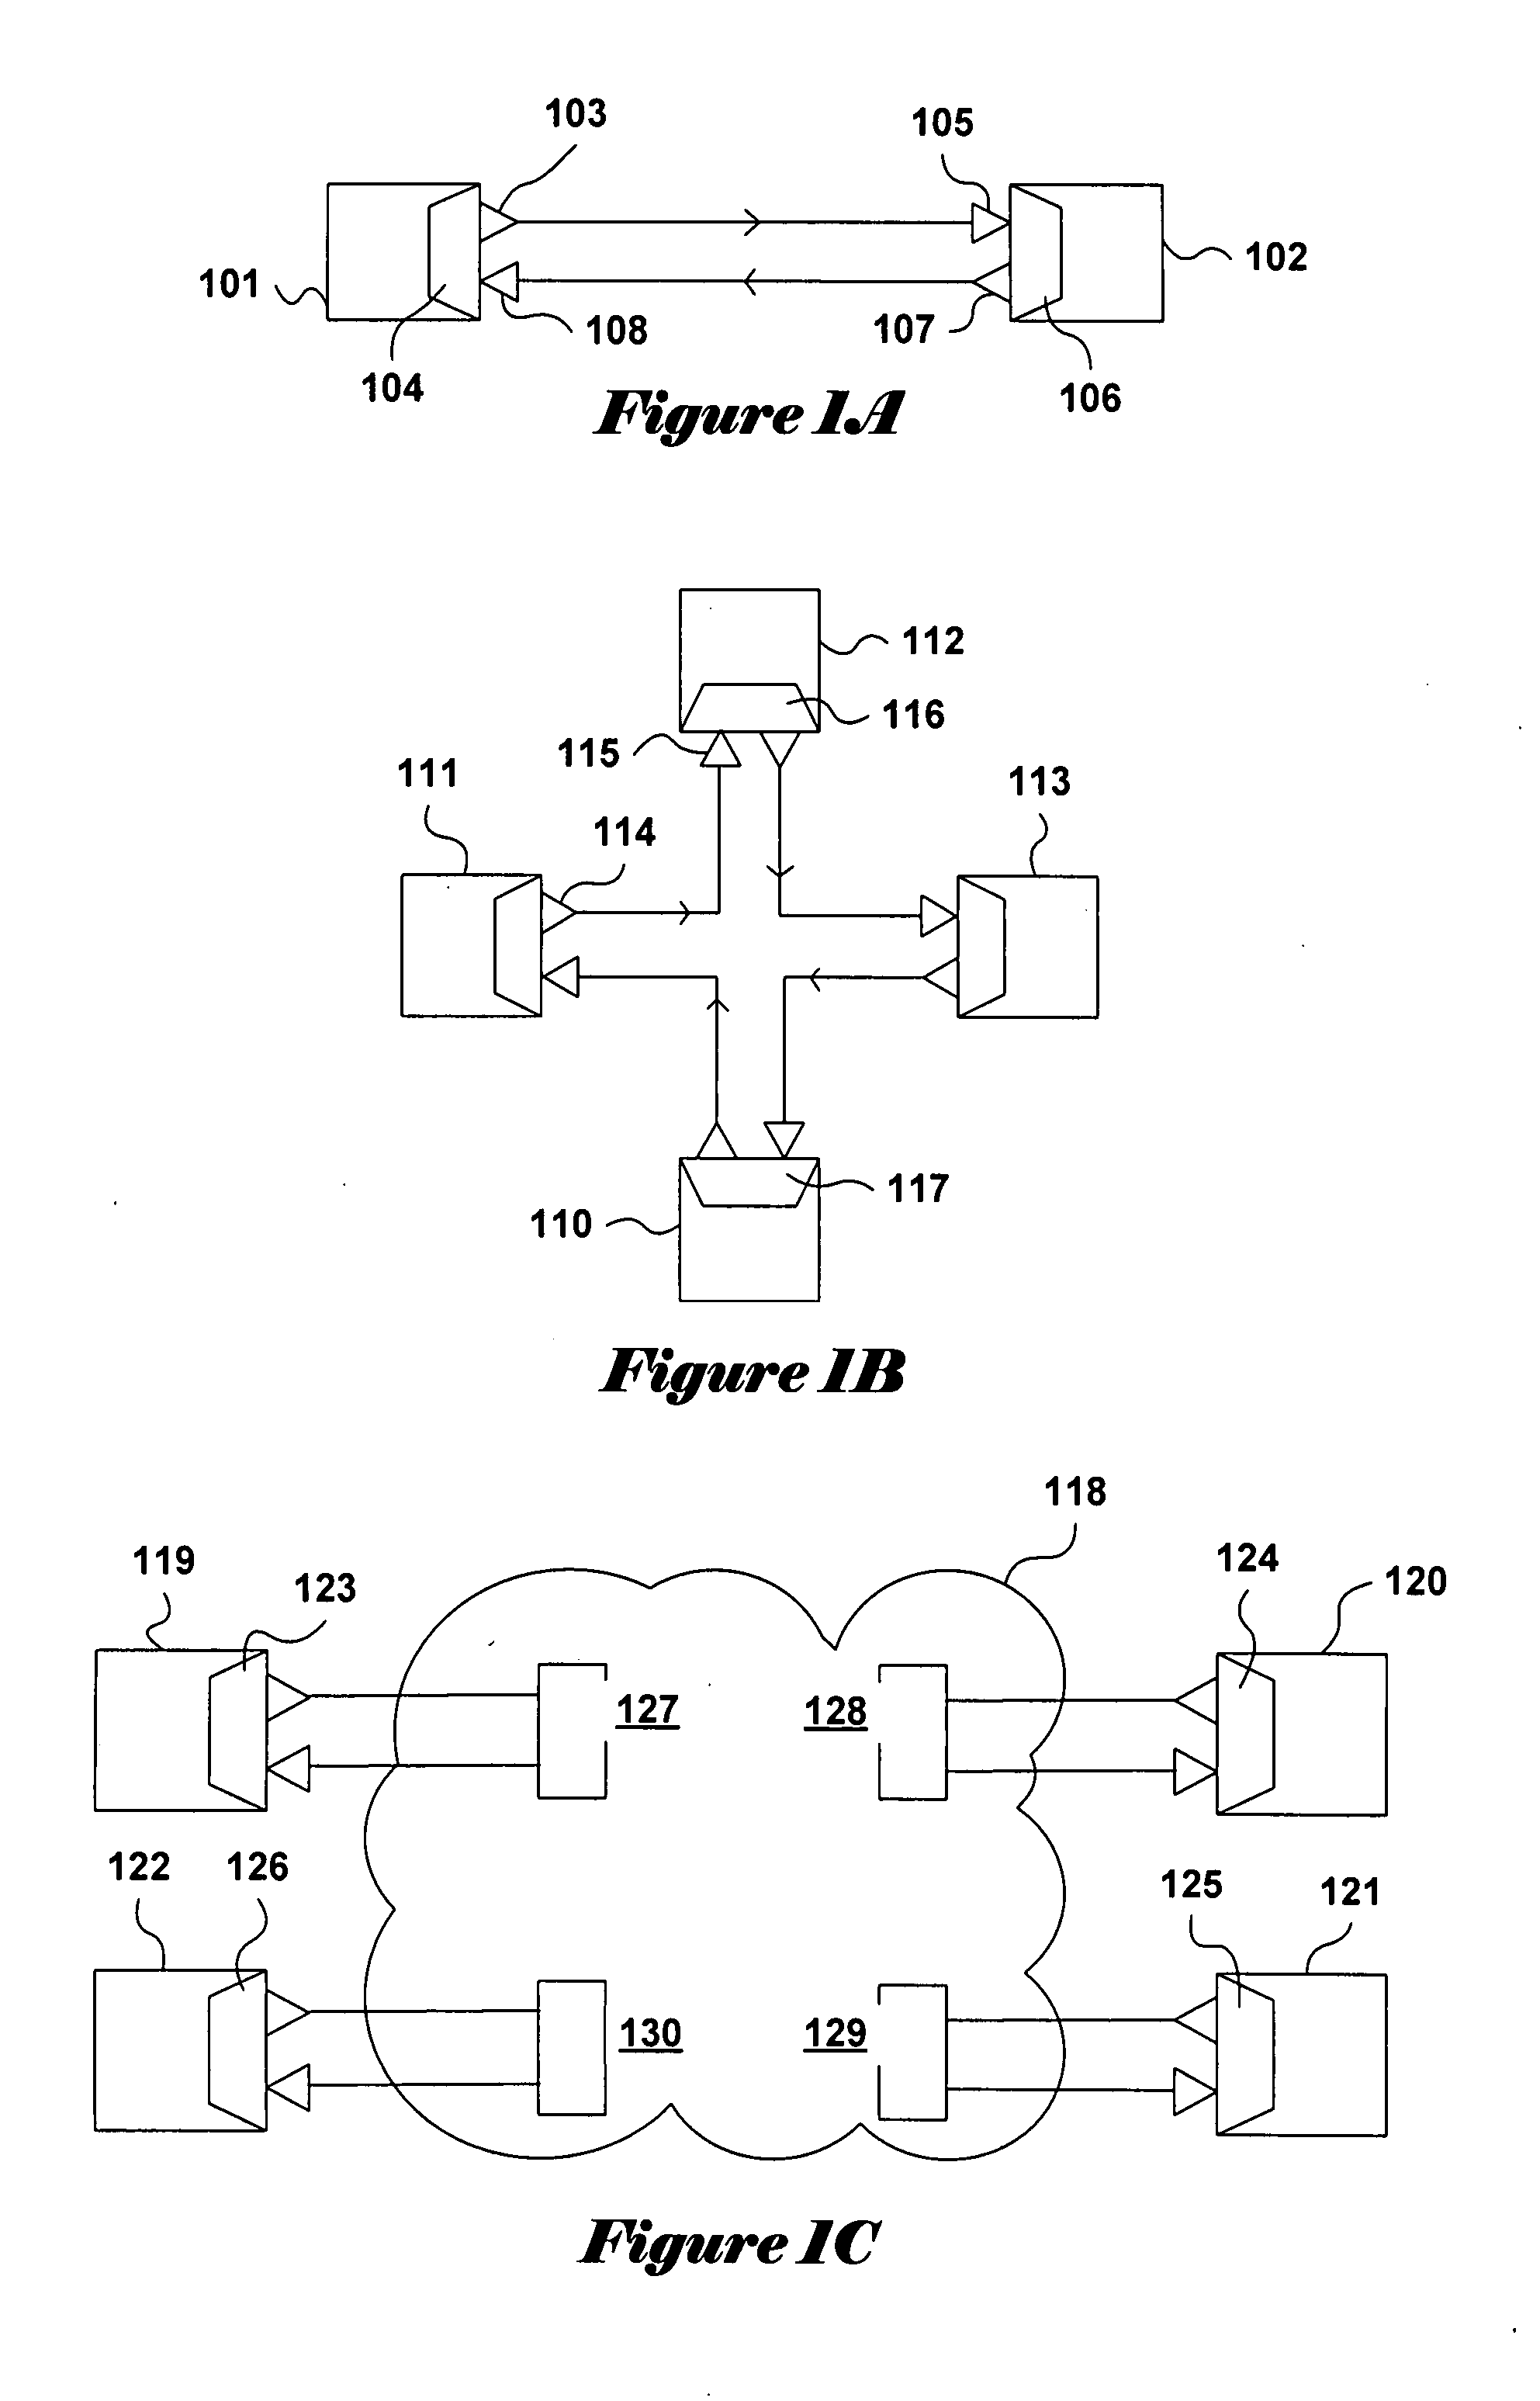 Method and interface for access to memory within a first electronic device by a second electronic device